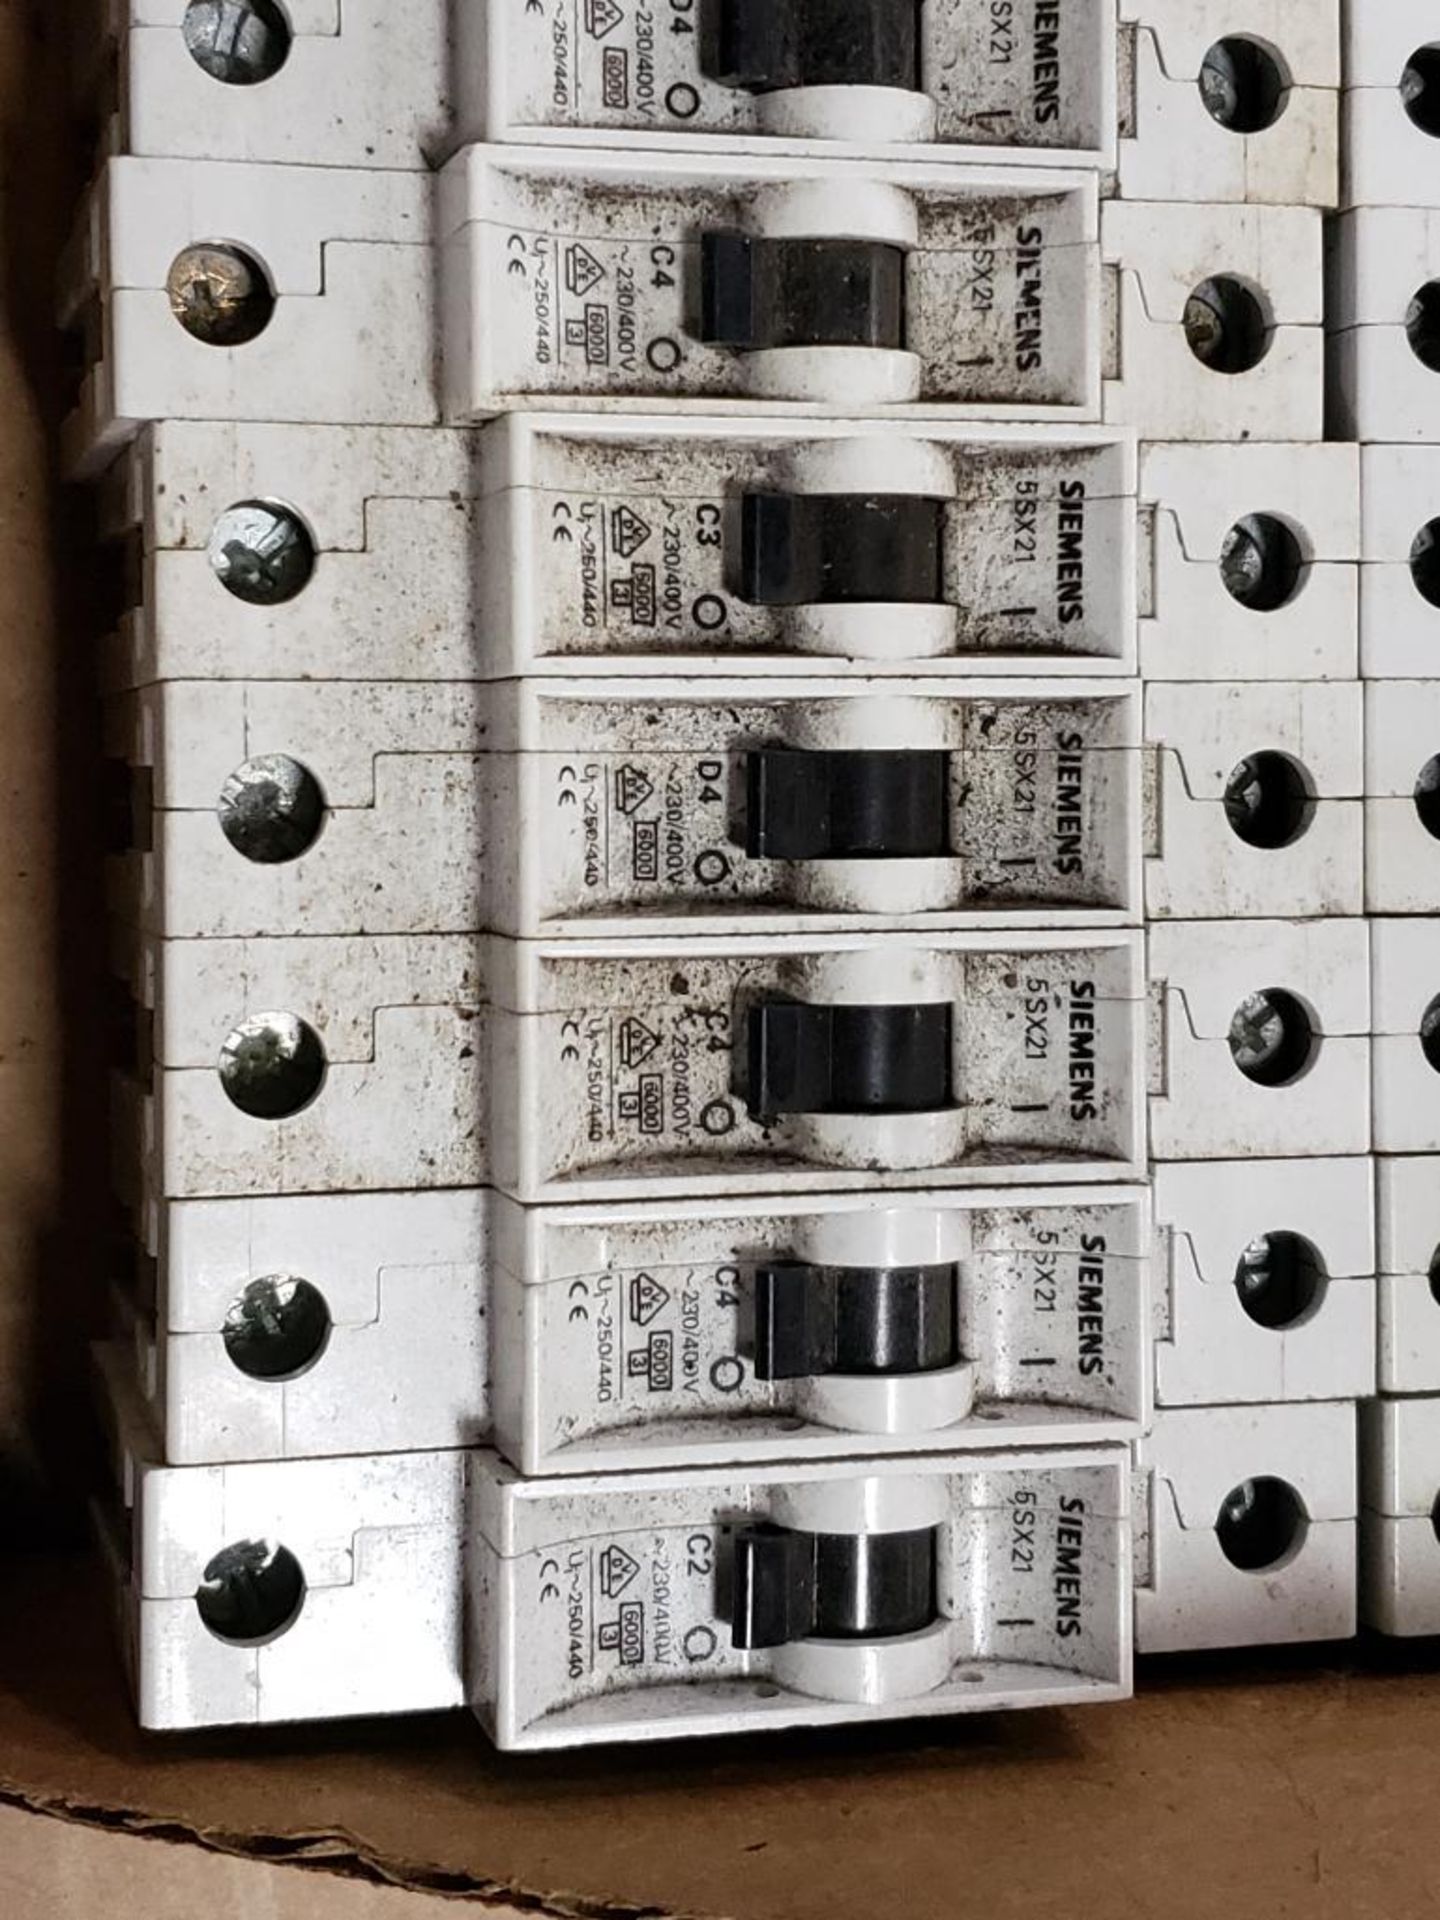 Qty 51 - Assorted fuse breaker. Siemens. - Image 9 of 9